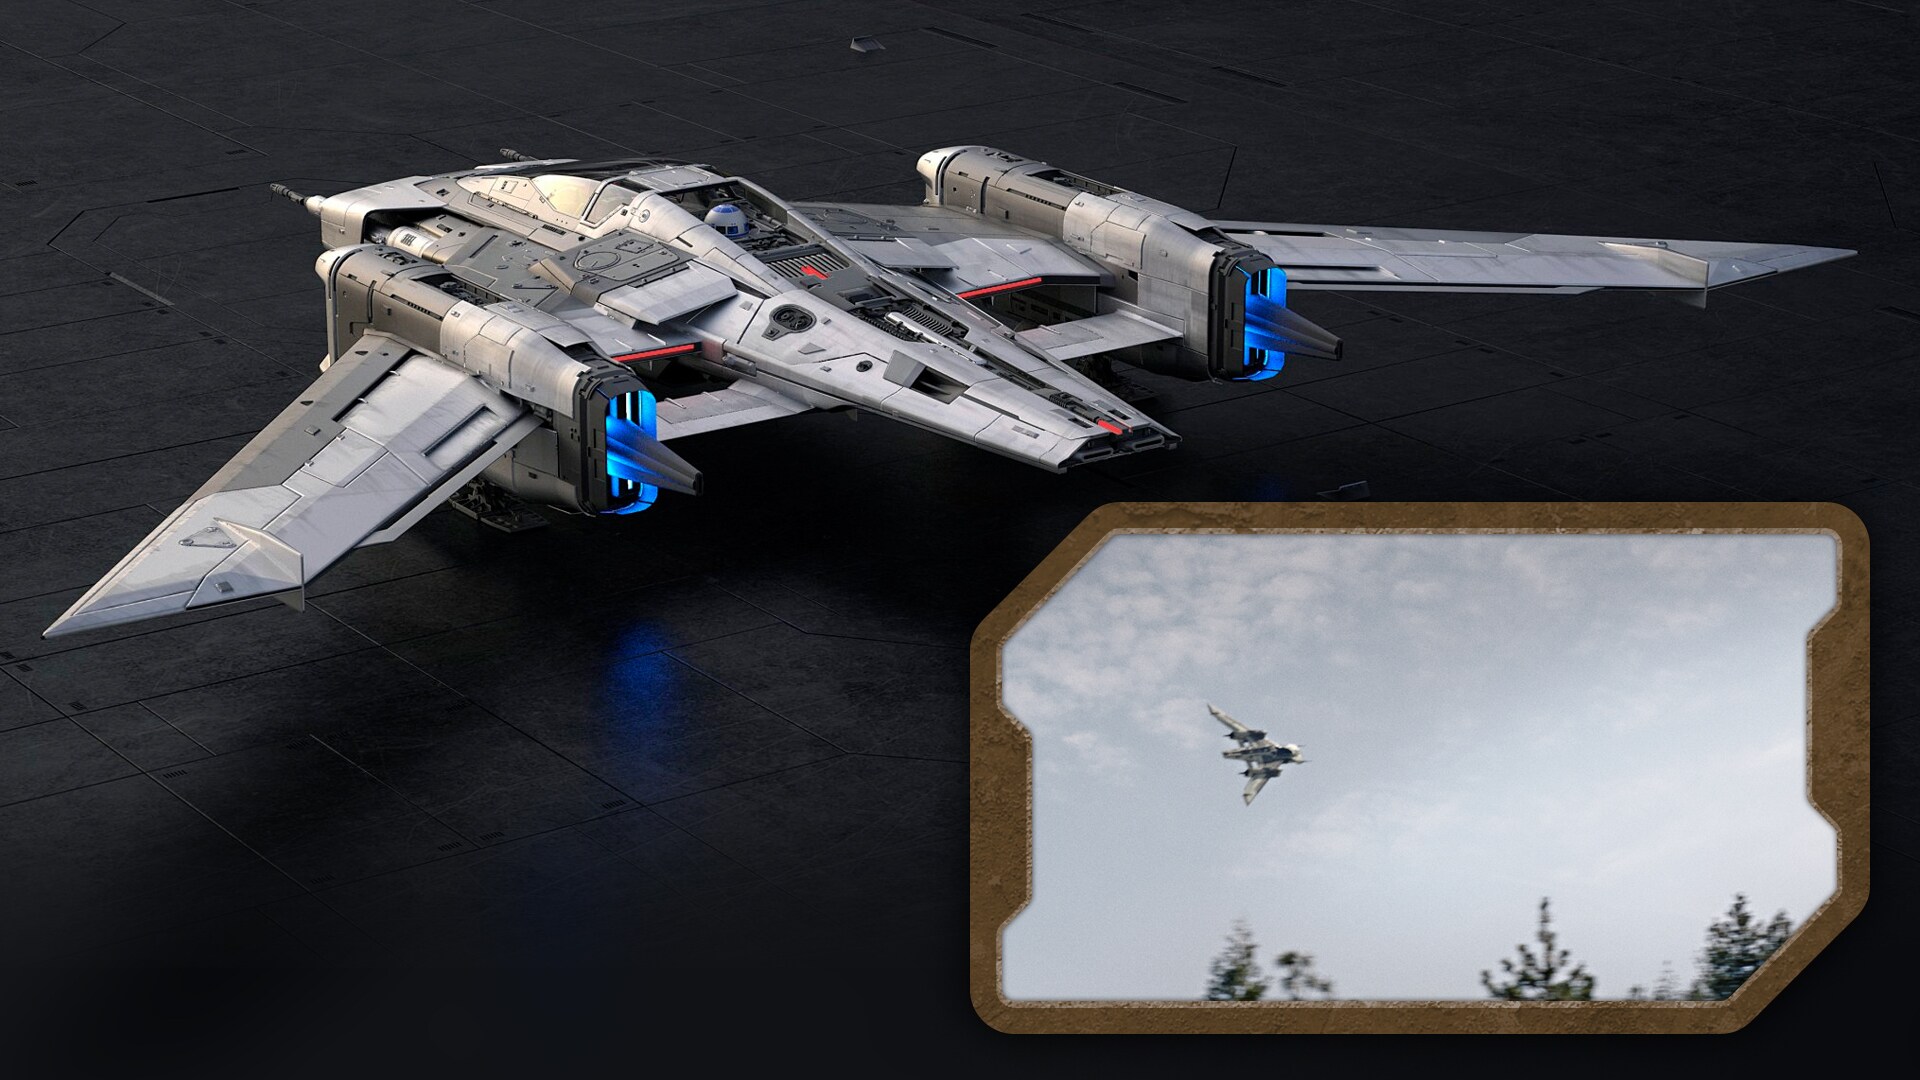 The ship Leia imagines the ranger flying is the Tri-Wing S-91x Pegasus starfighter design, develo...